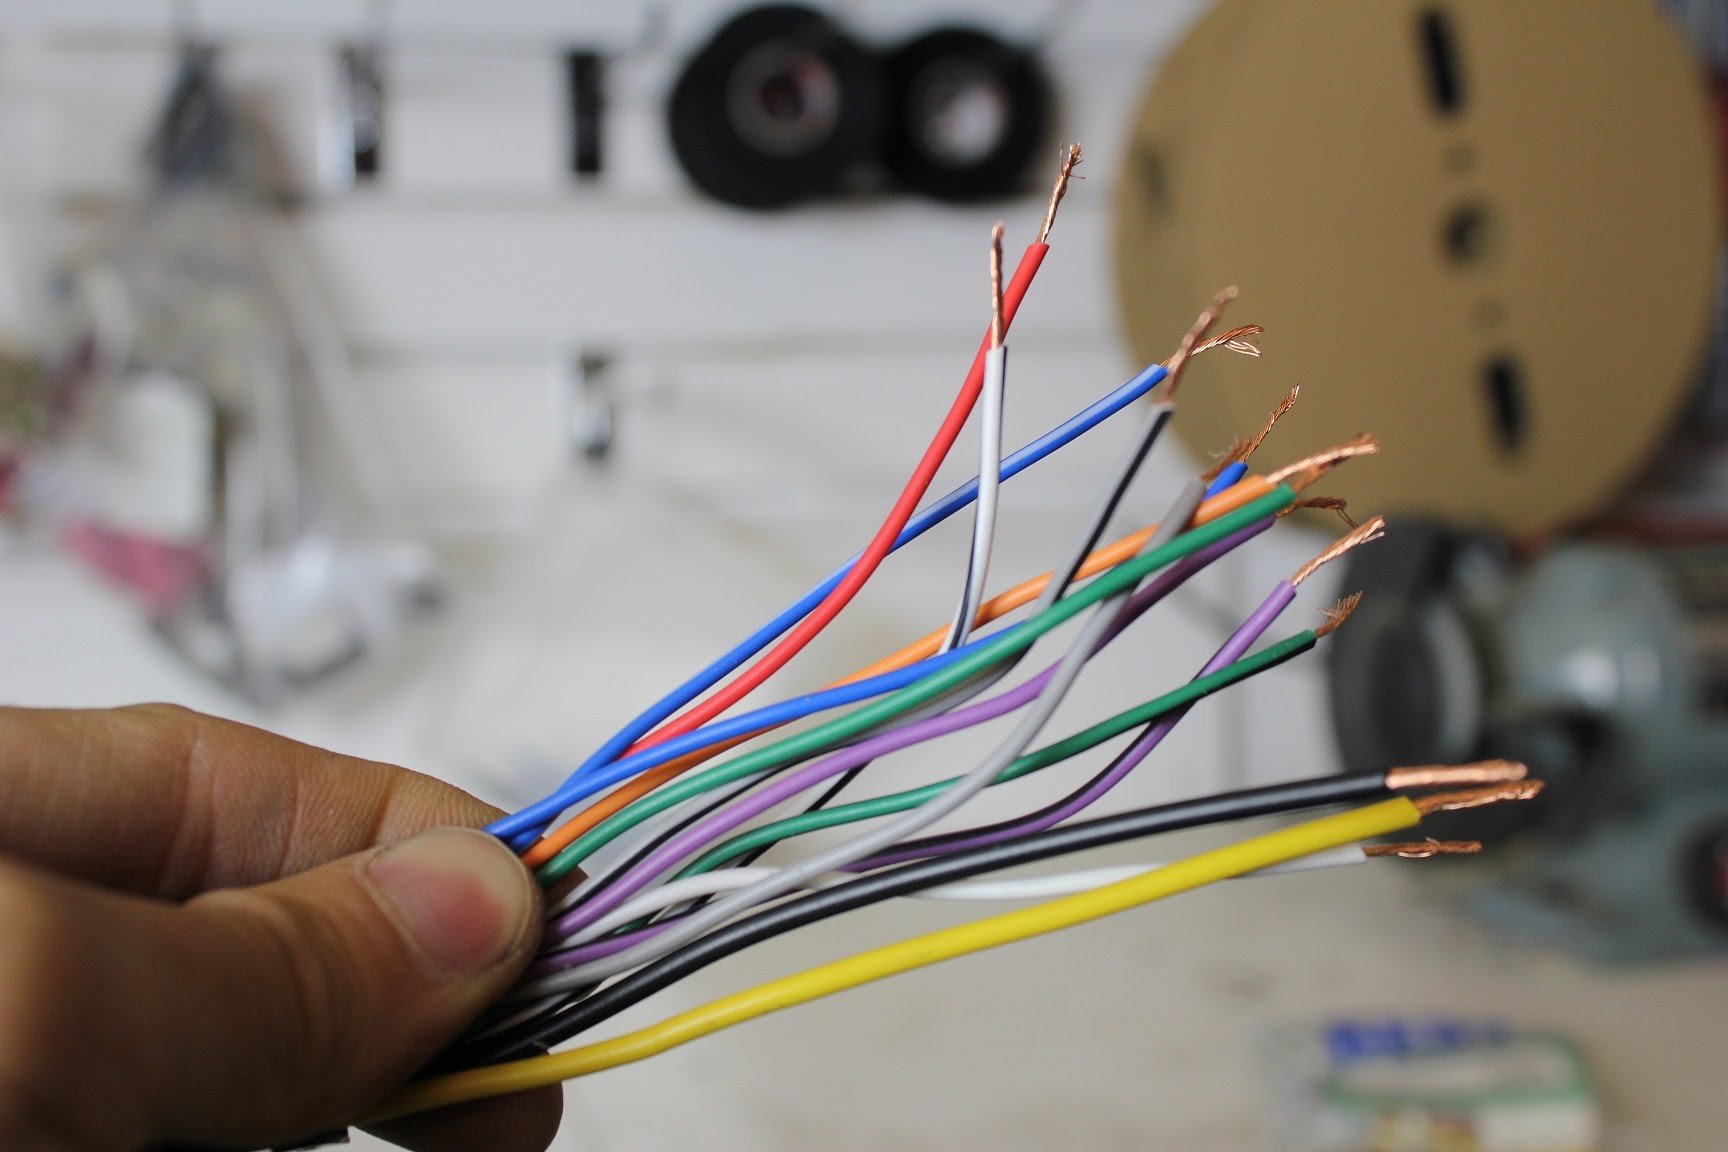 How To Install A Radio Without A Wiring Harness Adapter